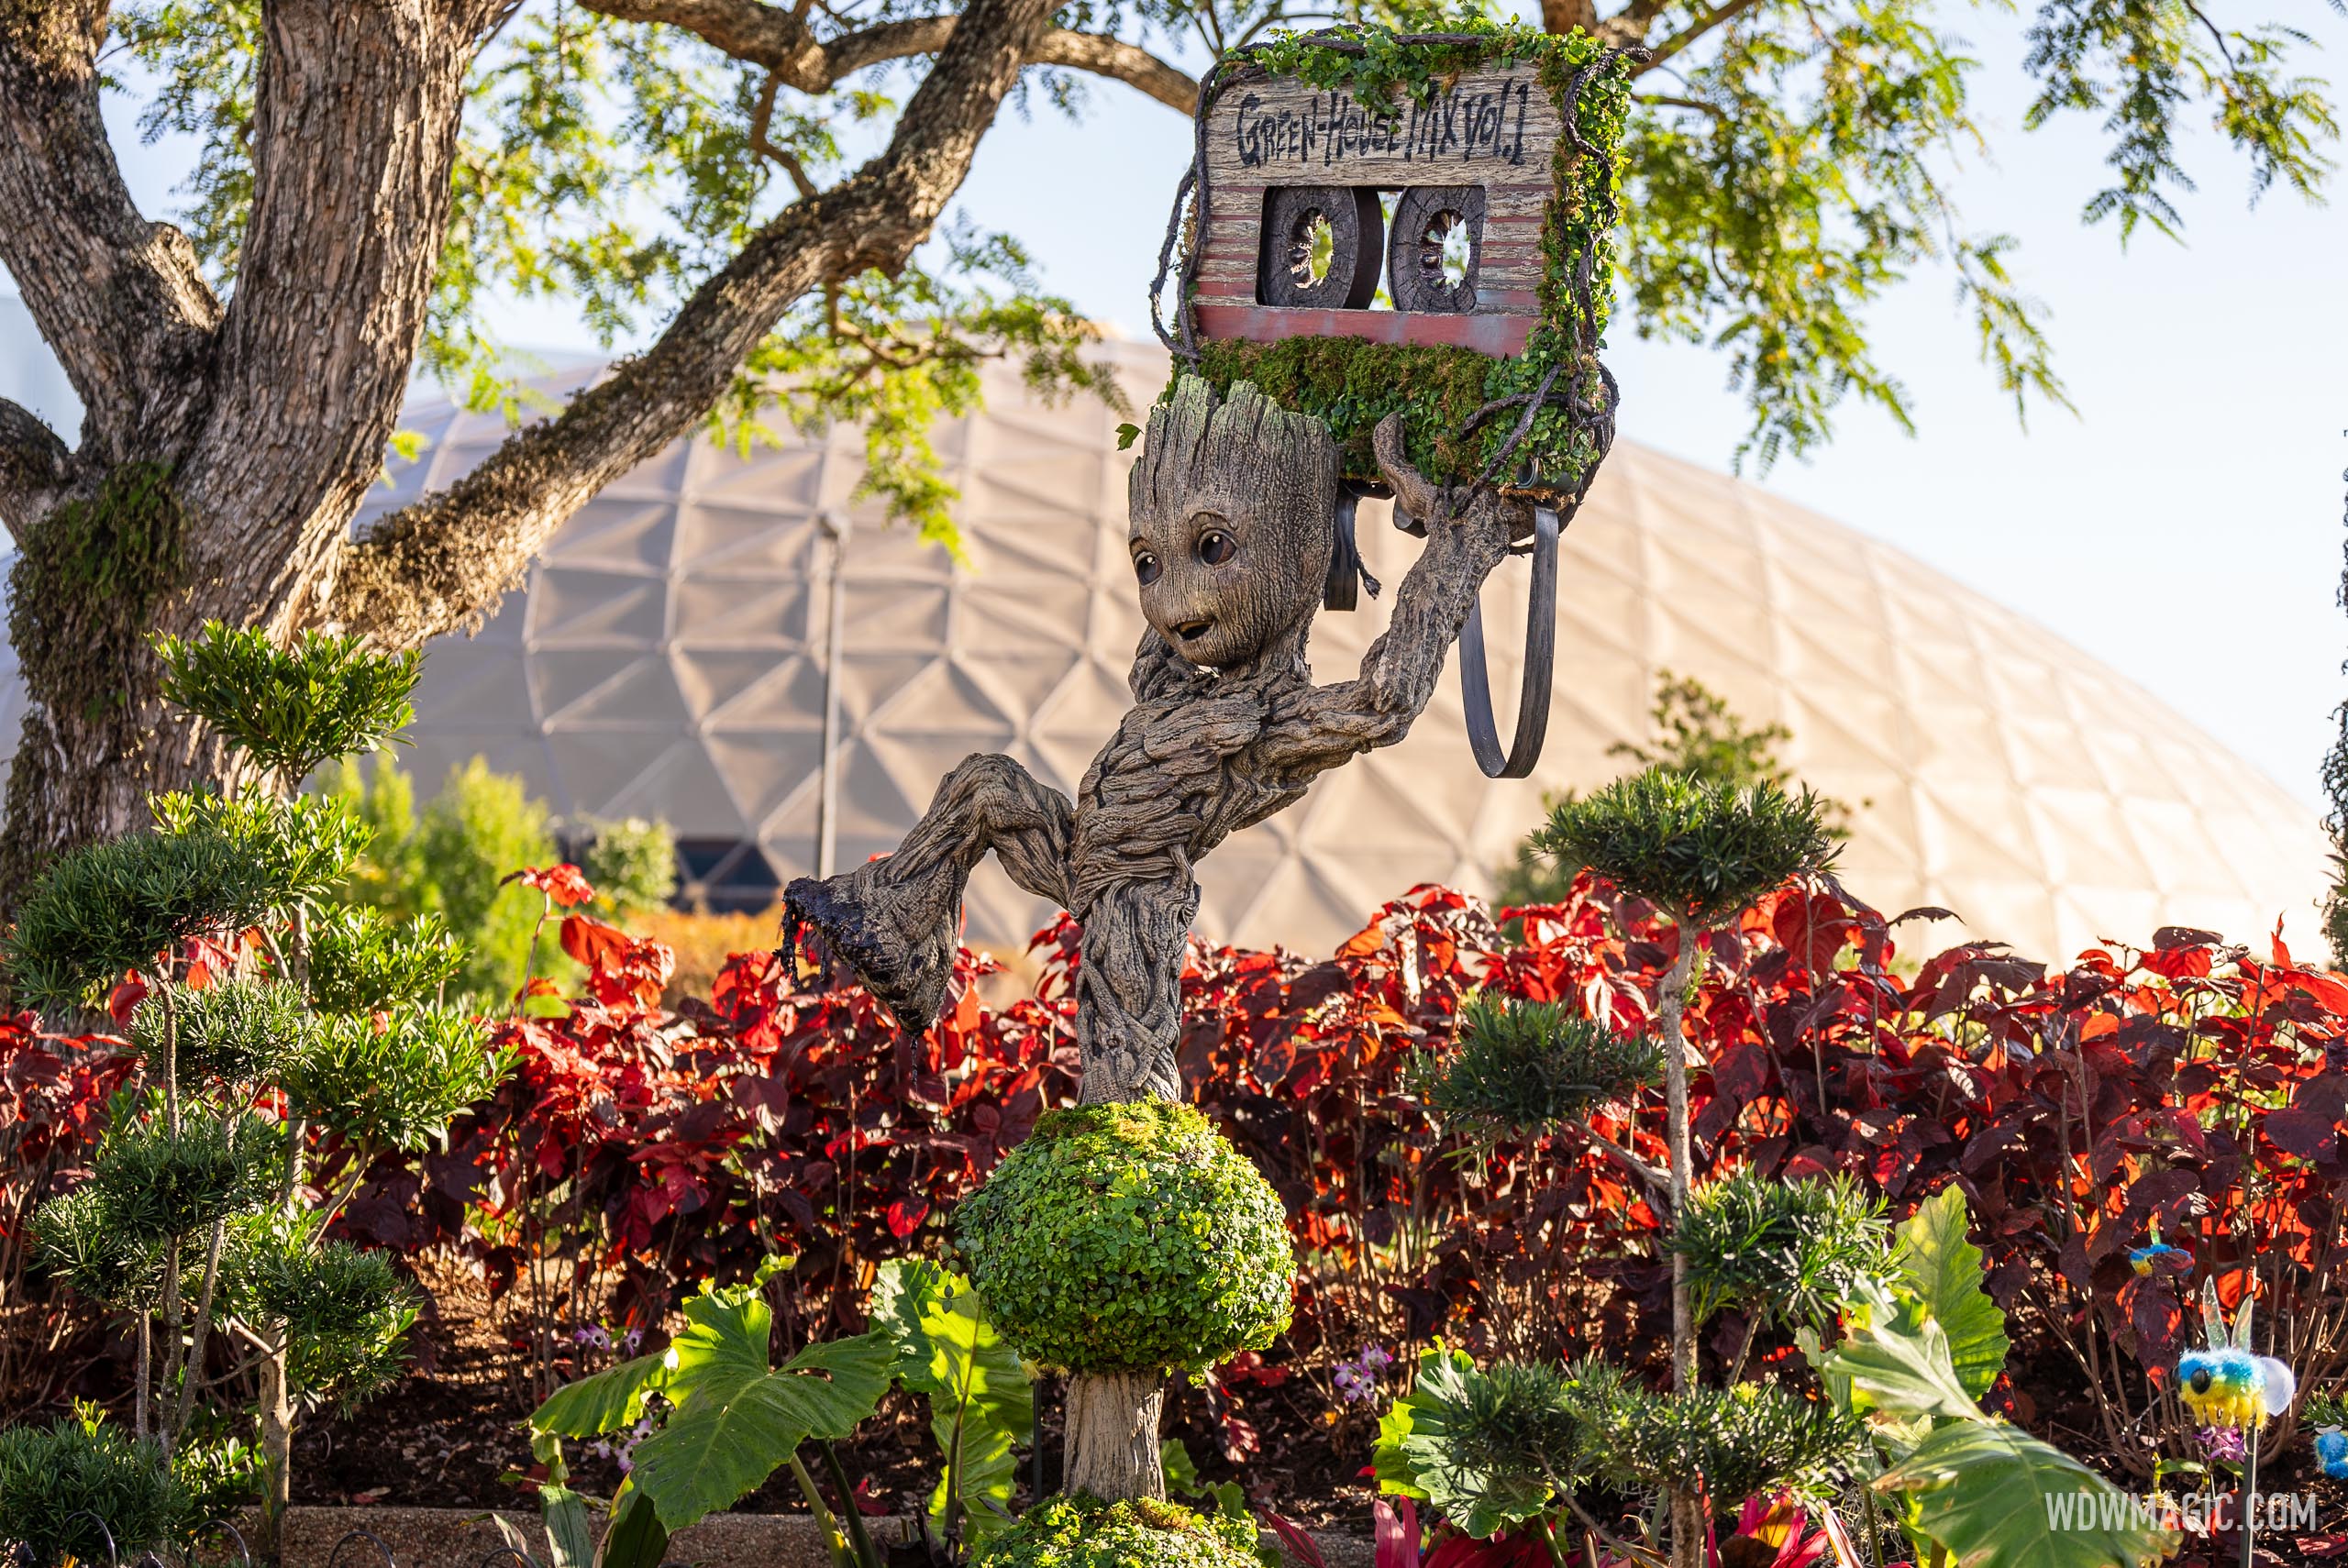 Watch Disney install the new Guardians of the Galaxy topiary for the